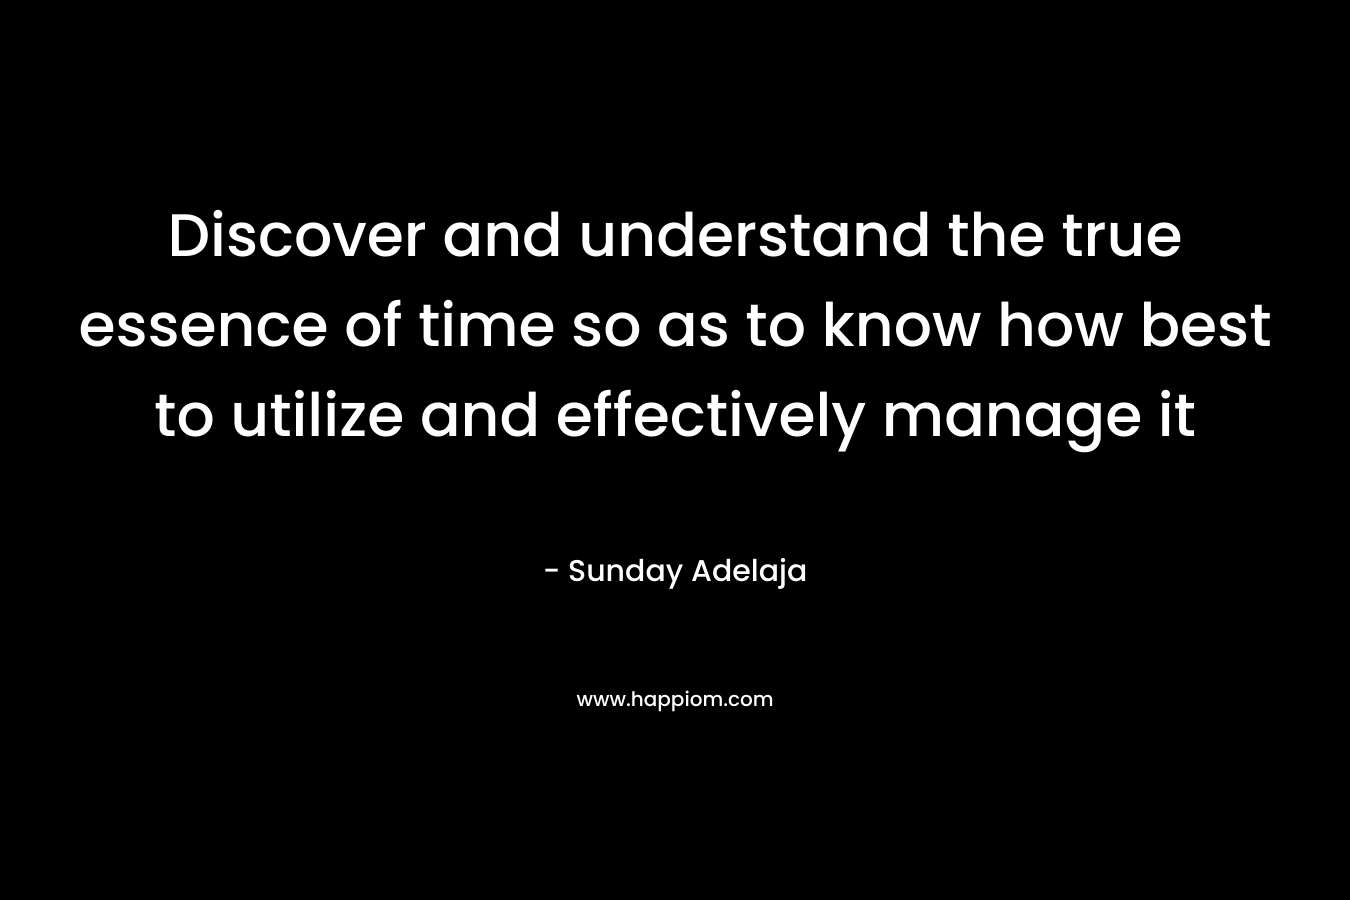 Discover and understand the true essence of time so as to know how best to utilize and effectively manage it